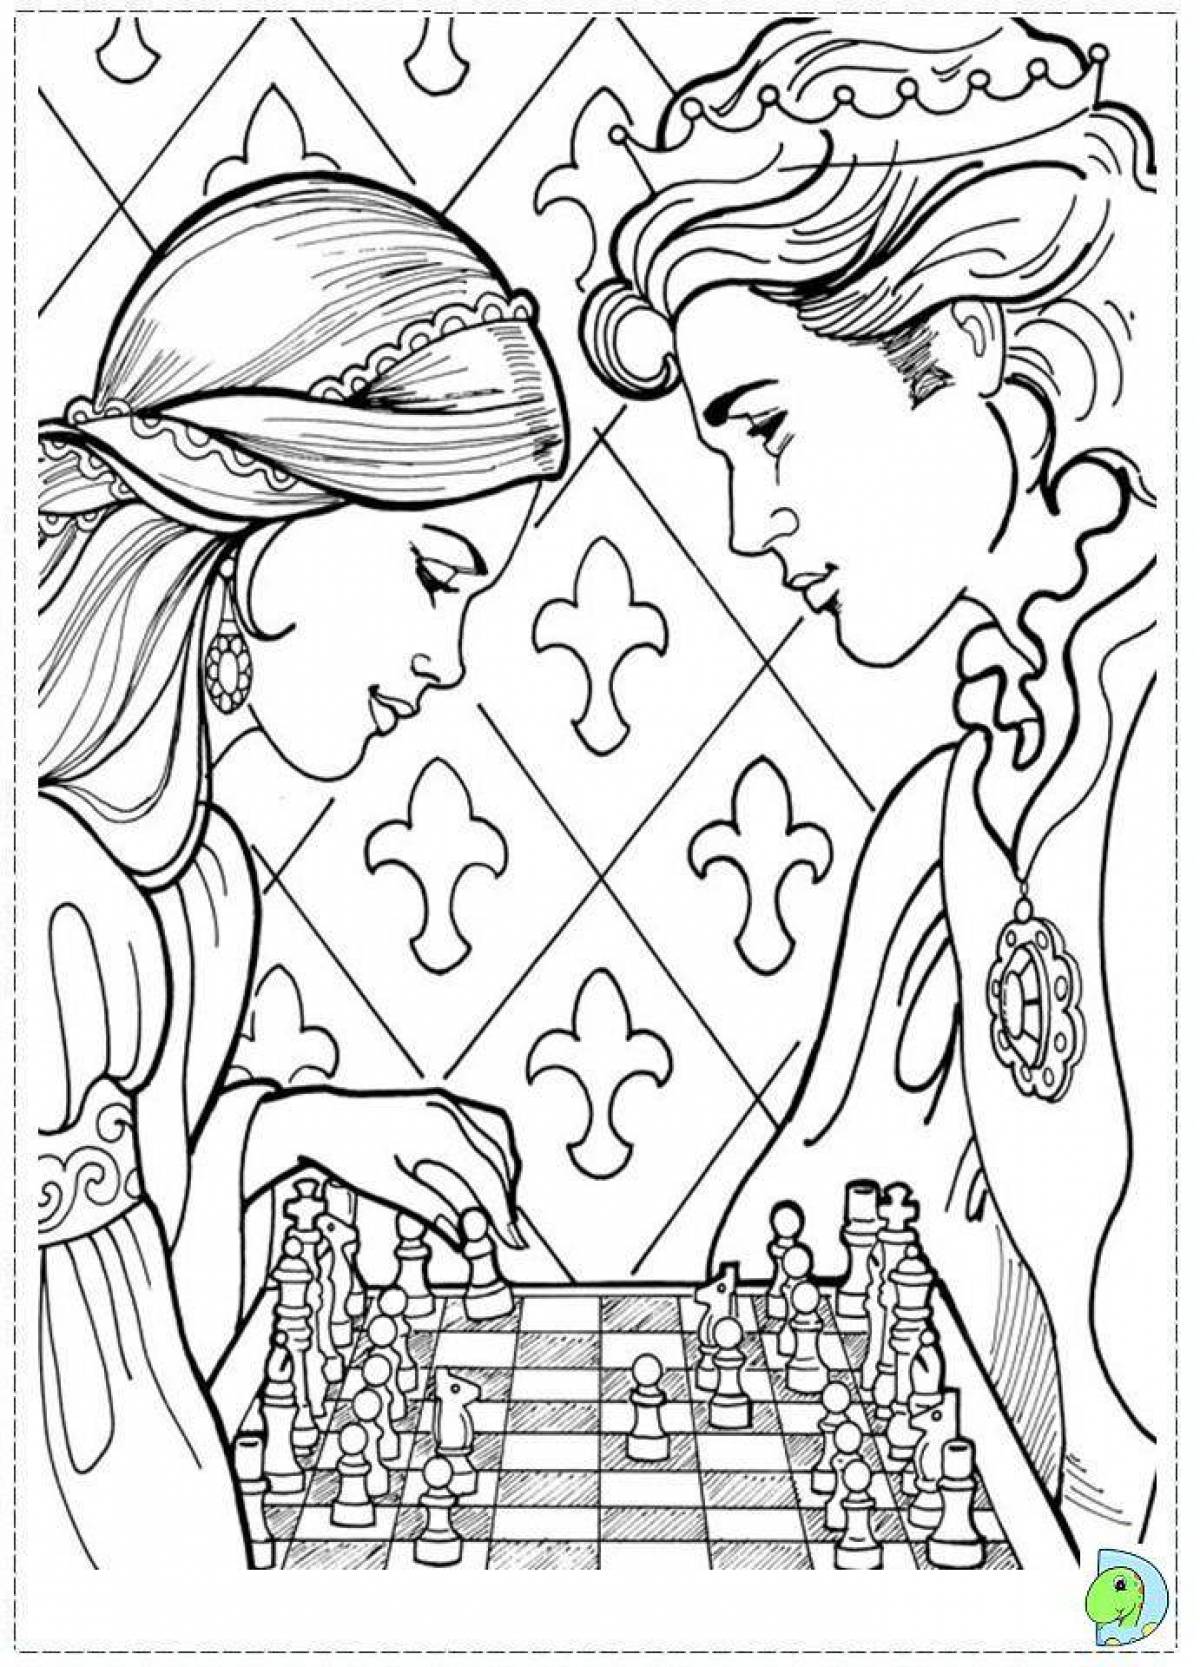 Artistic chess coloring page